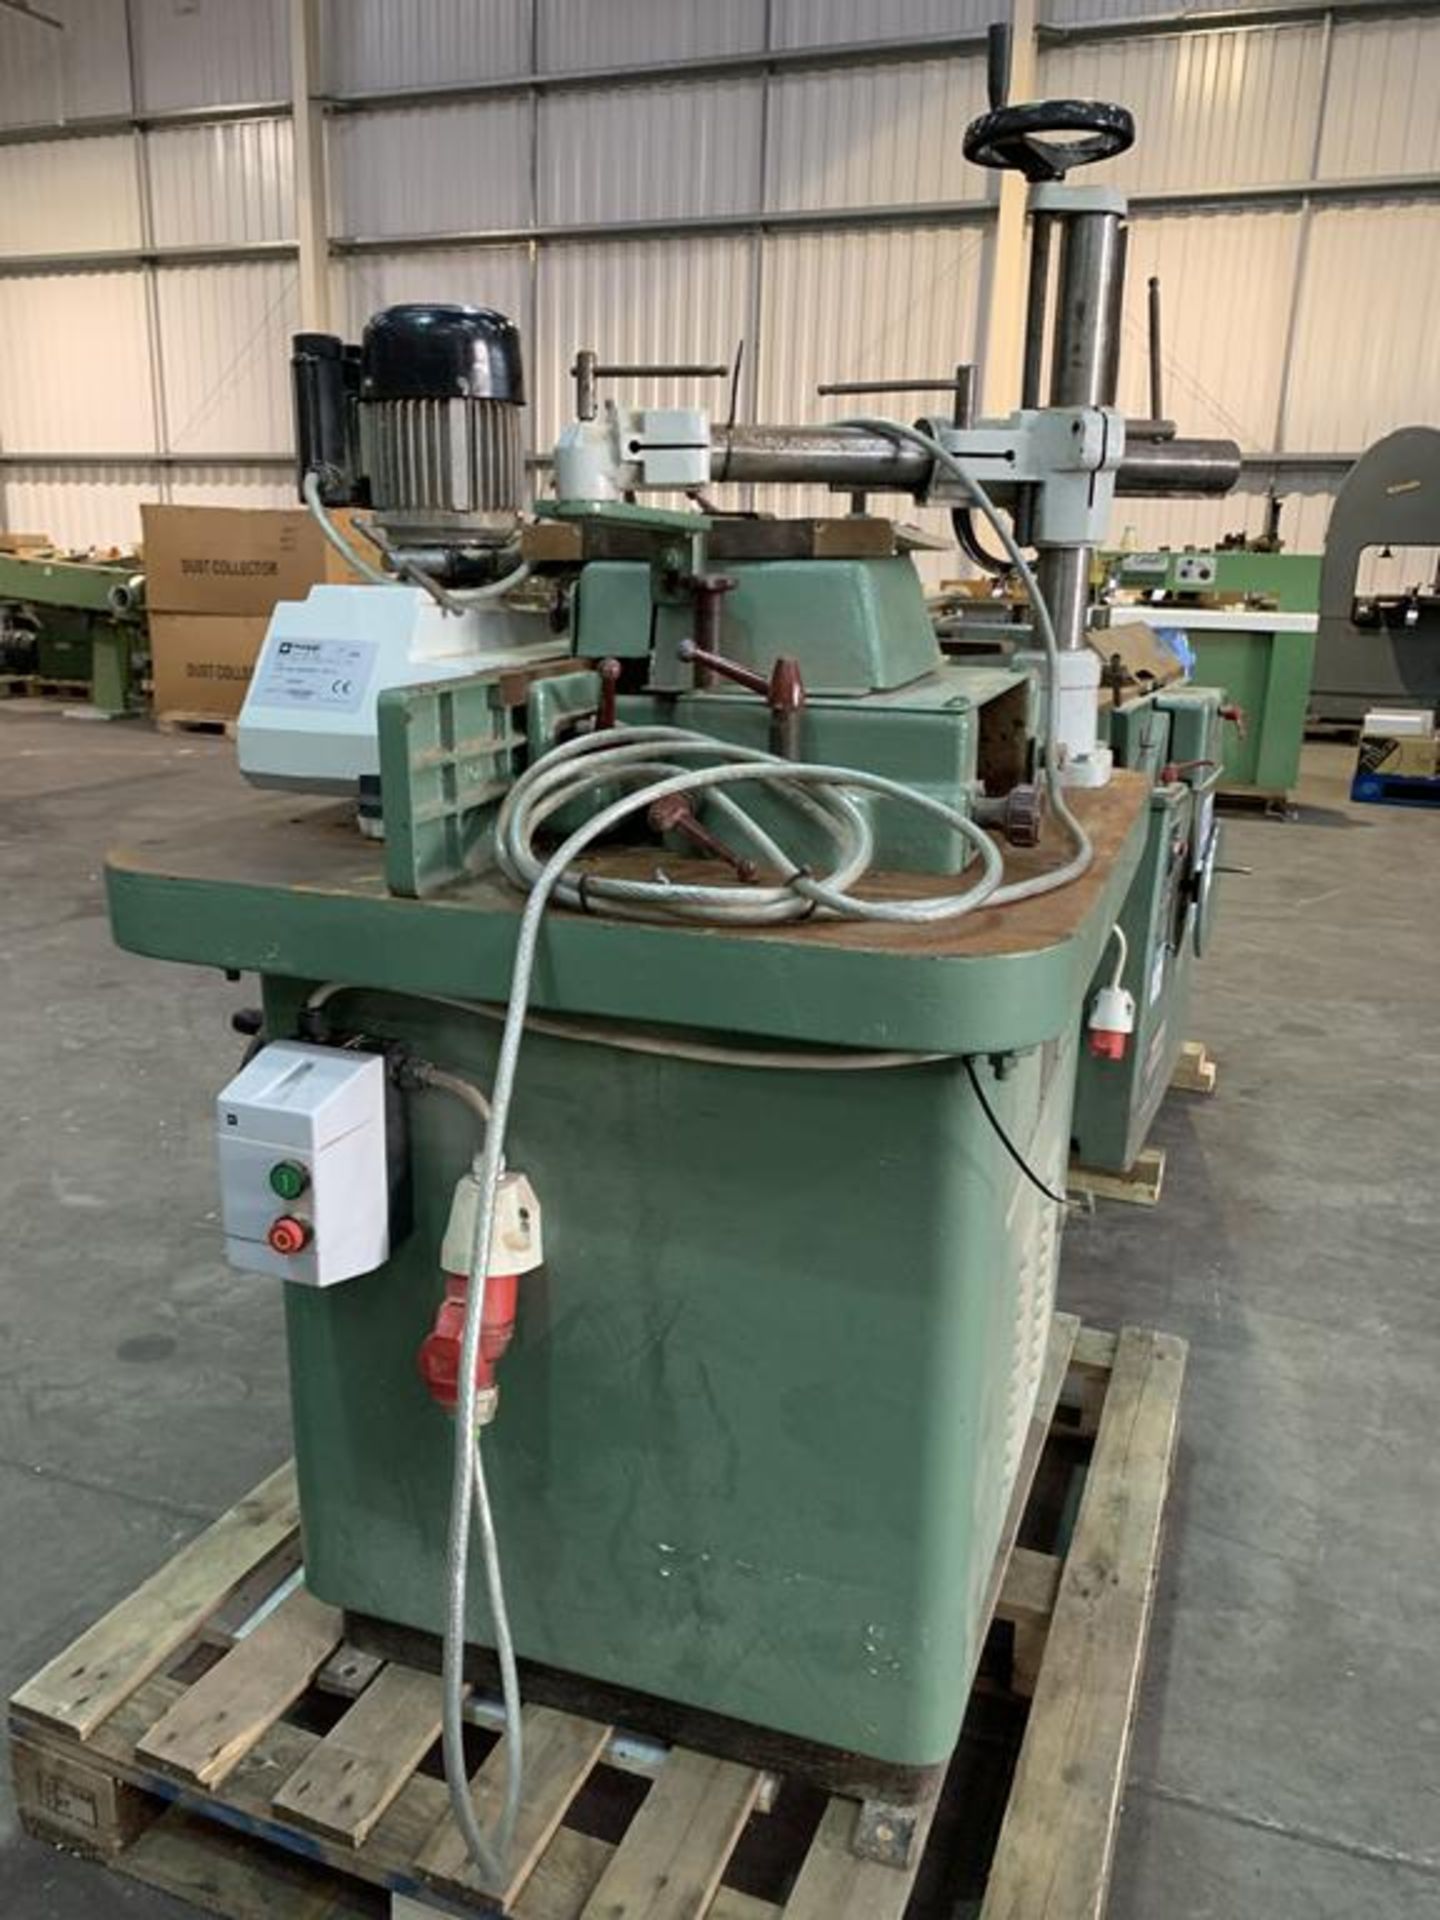 Wadkin Bursgreen BER3 Spindle Moulder with DC Brake and Steff 2034 Powered Roller Feed. 3phase - Image 7 of 10